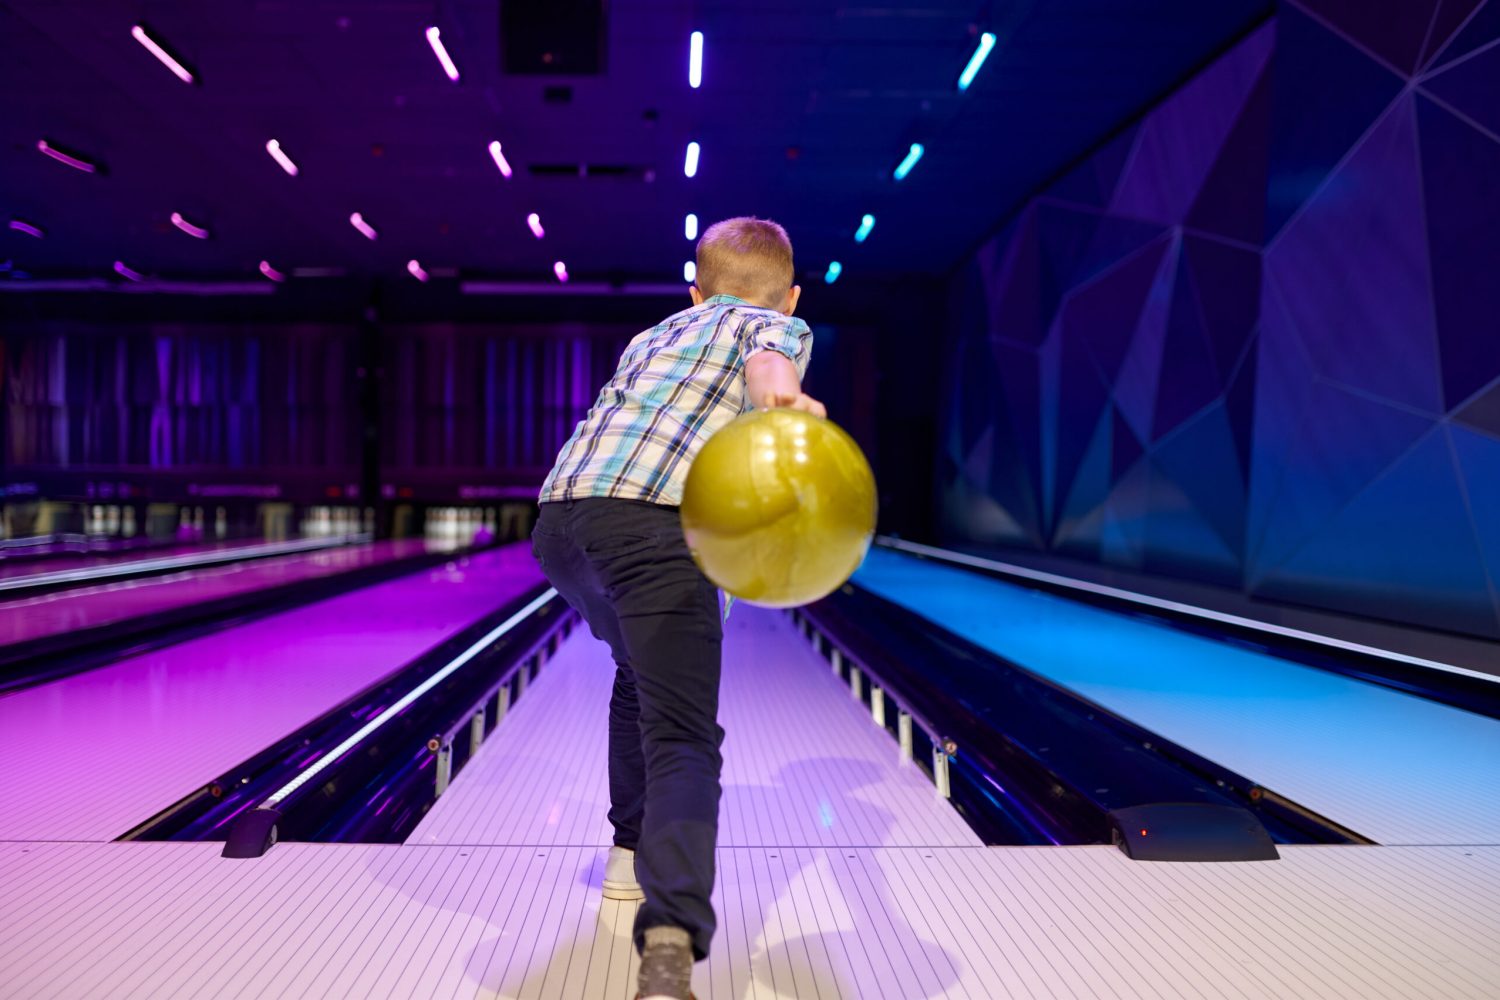 Boy holds a ball at the lane in bowling alley. Kid preparing to score a strike. Children having fun in entertainment center, bowler kid